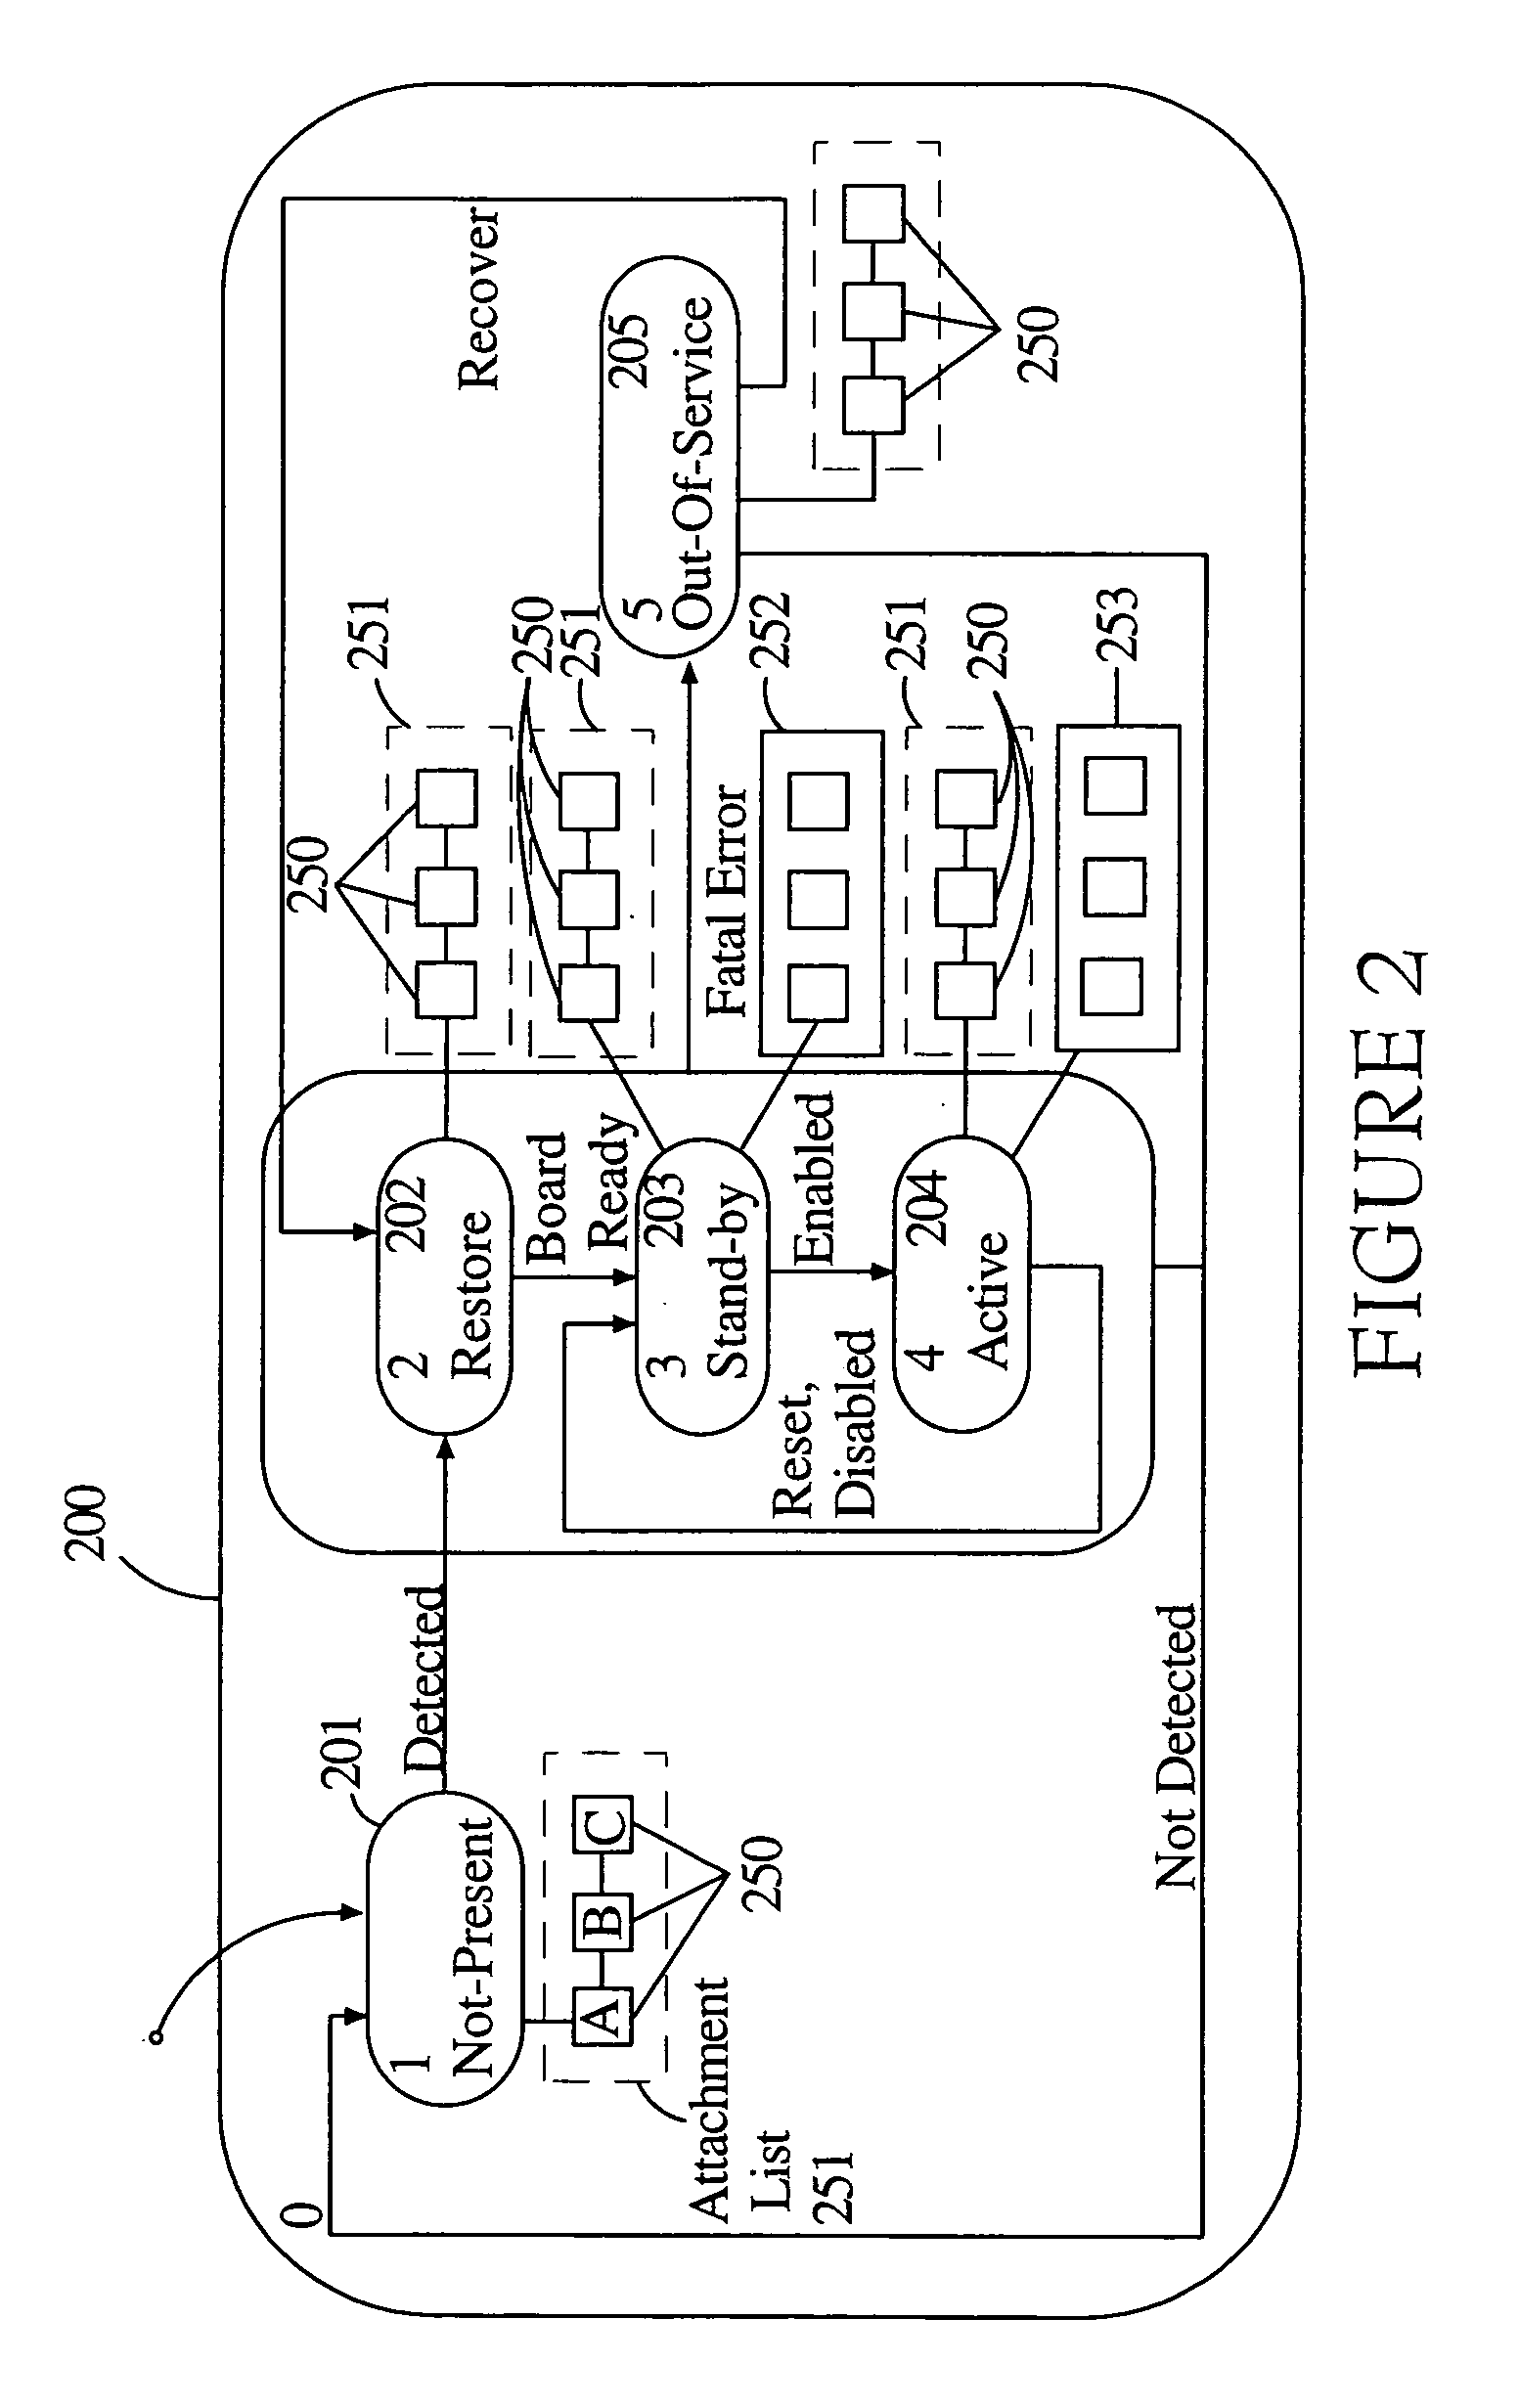 Hybrid agent-oriented object model to provide software fault tolerance between distributed processor nodes